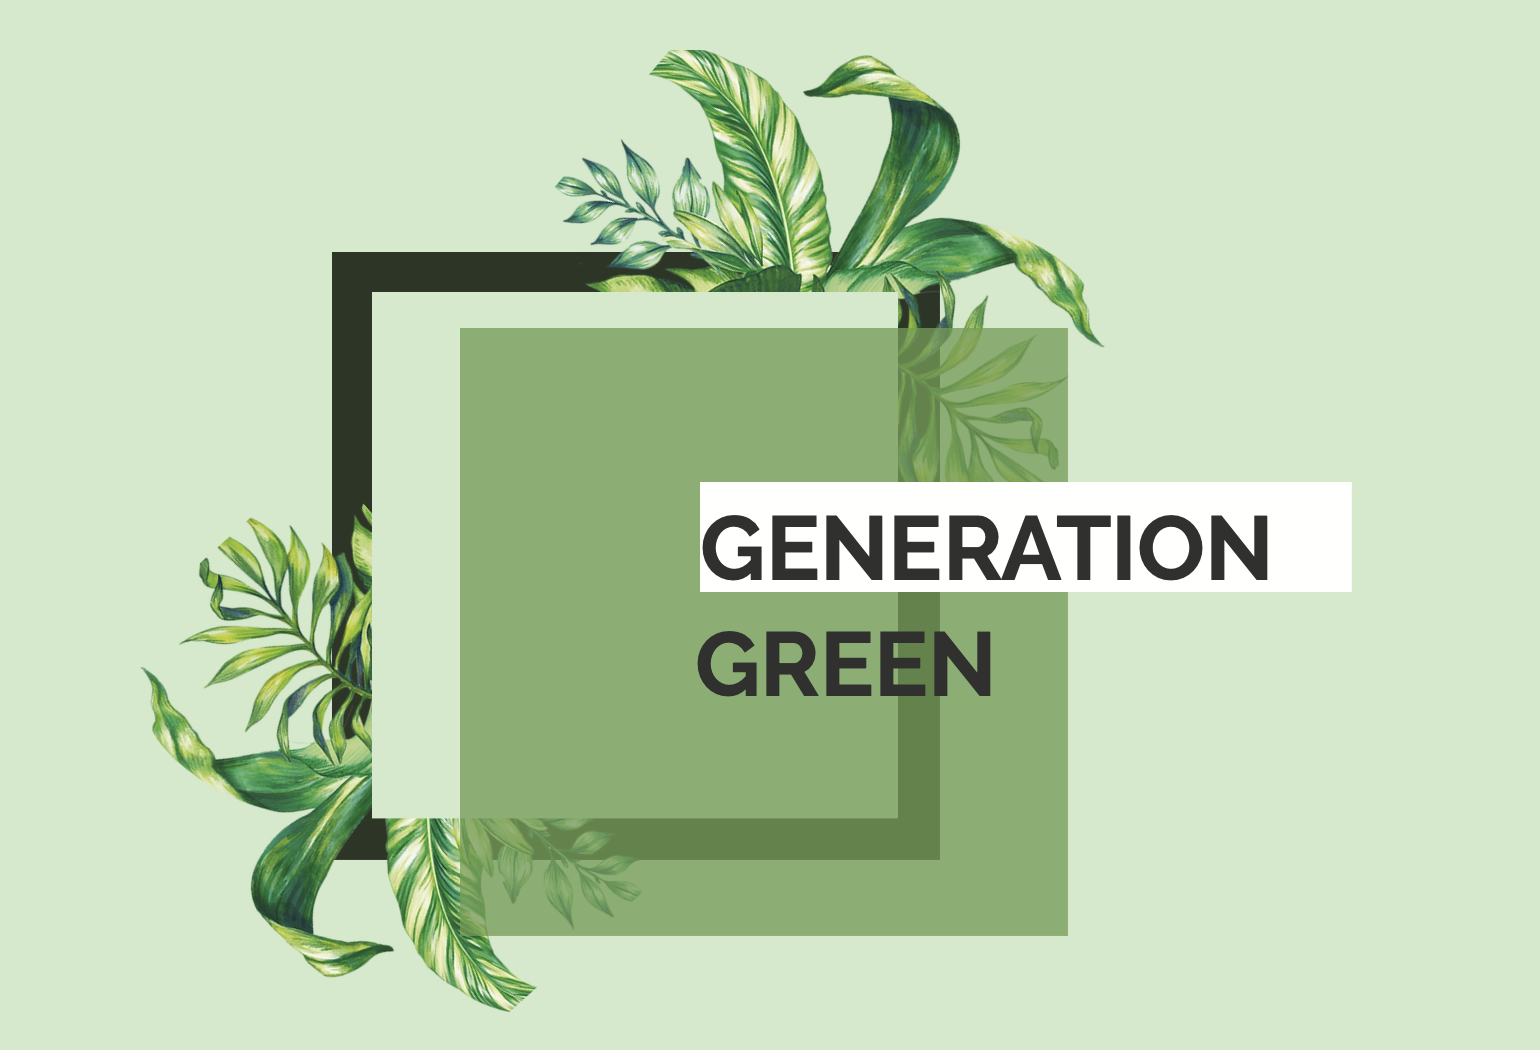 Beautiful plants and leaves, green background with a light green box overlaid and a black outline of a square. There is text that reads Generation Green. 